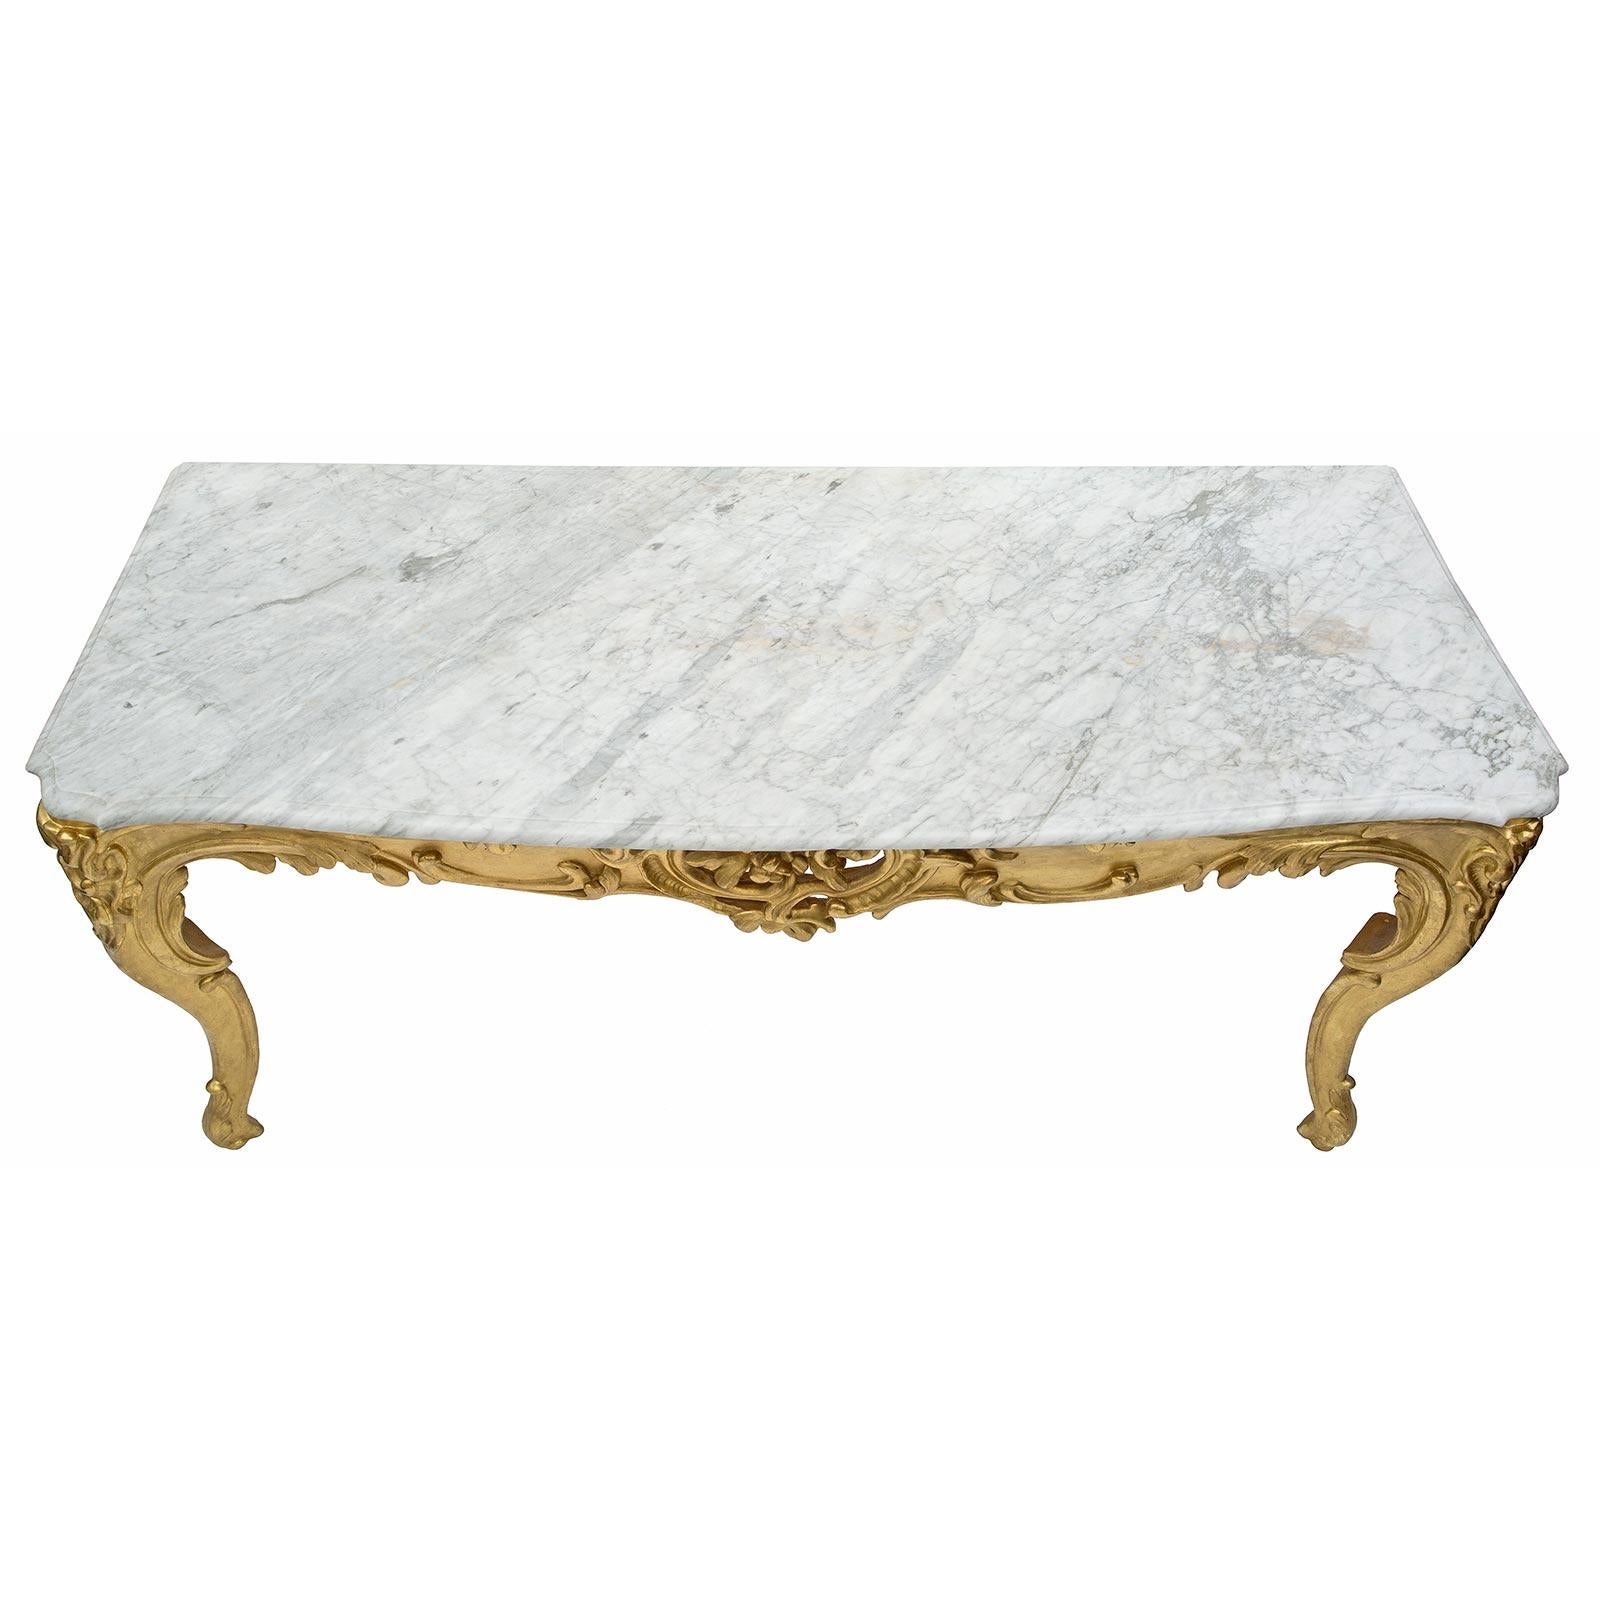 A striking French 18th century Régence Period giltwood and marble console. The console is raised by handsome cabriole legs with foliate movements and fine floral carvings at each corner. The scalloped shaped frieze displays a beautiful pierced